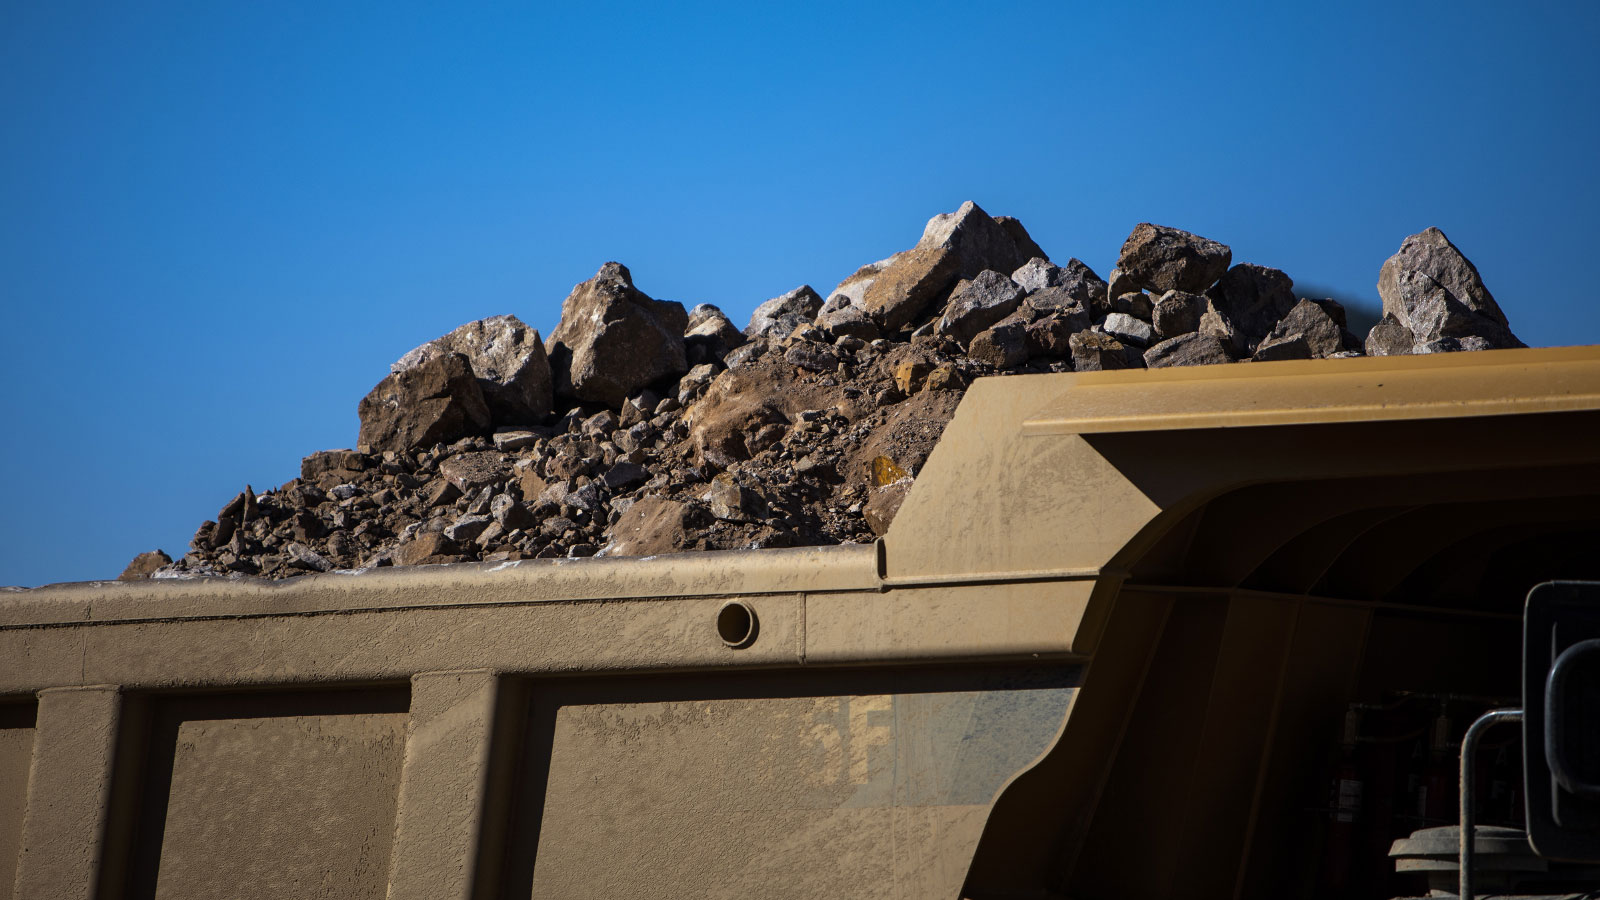 a truck carrying rocks against a blue sky